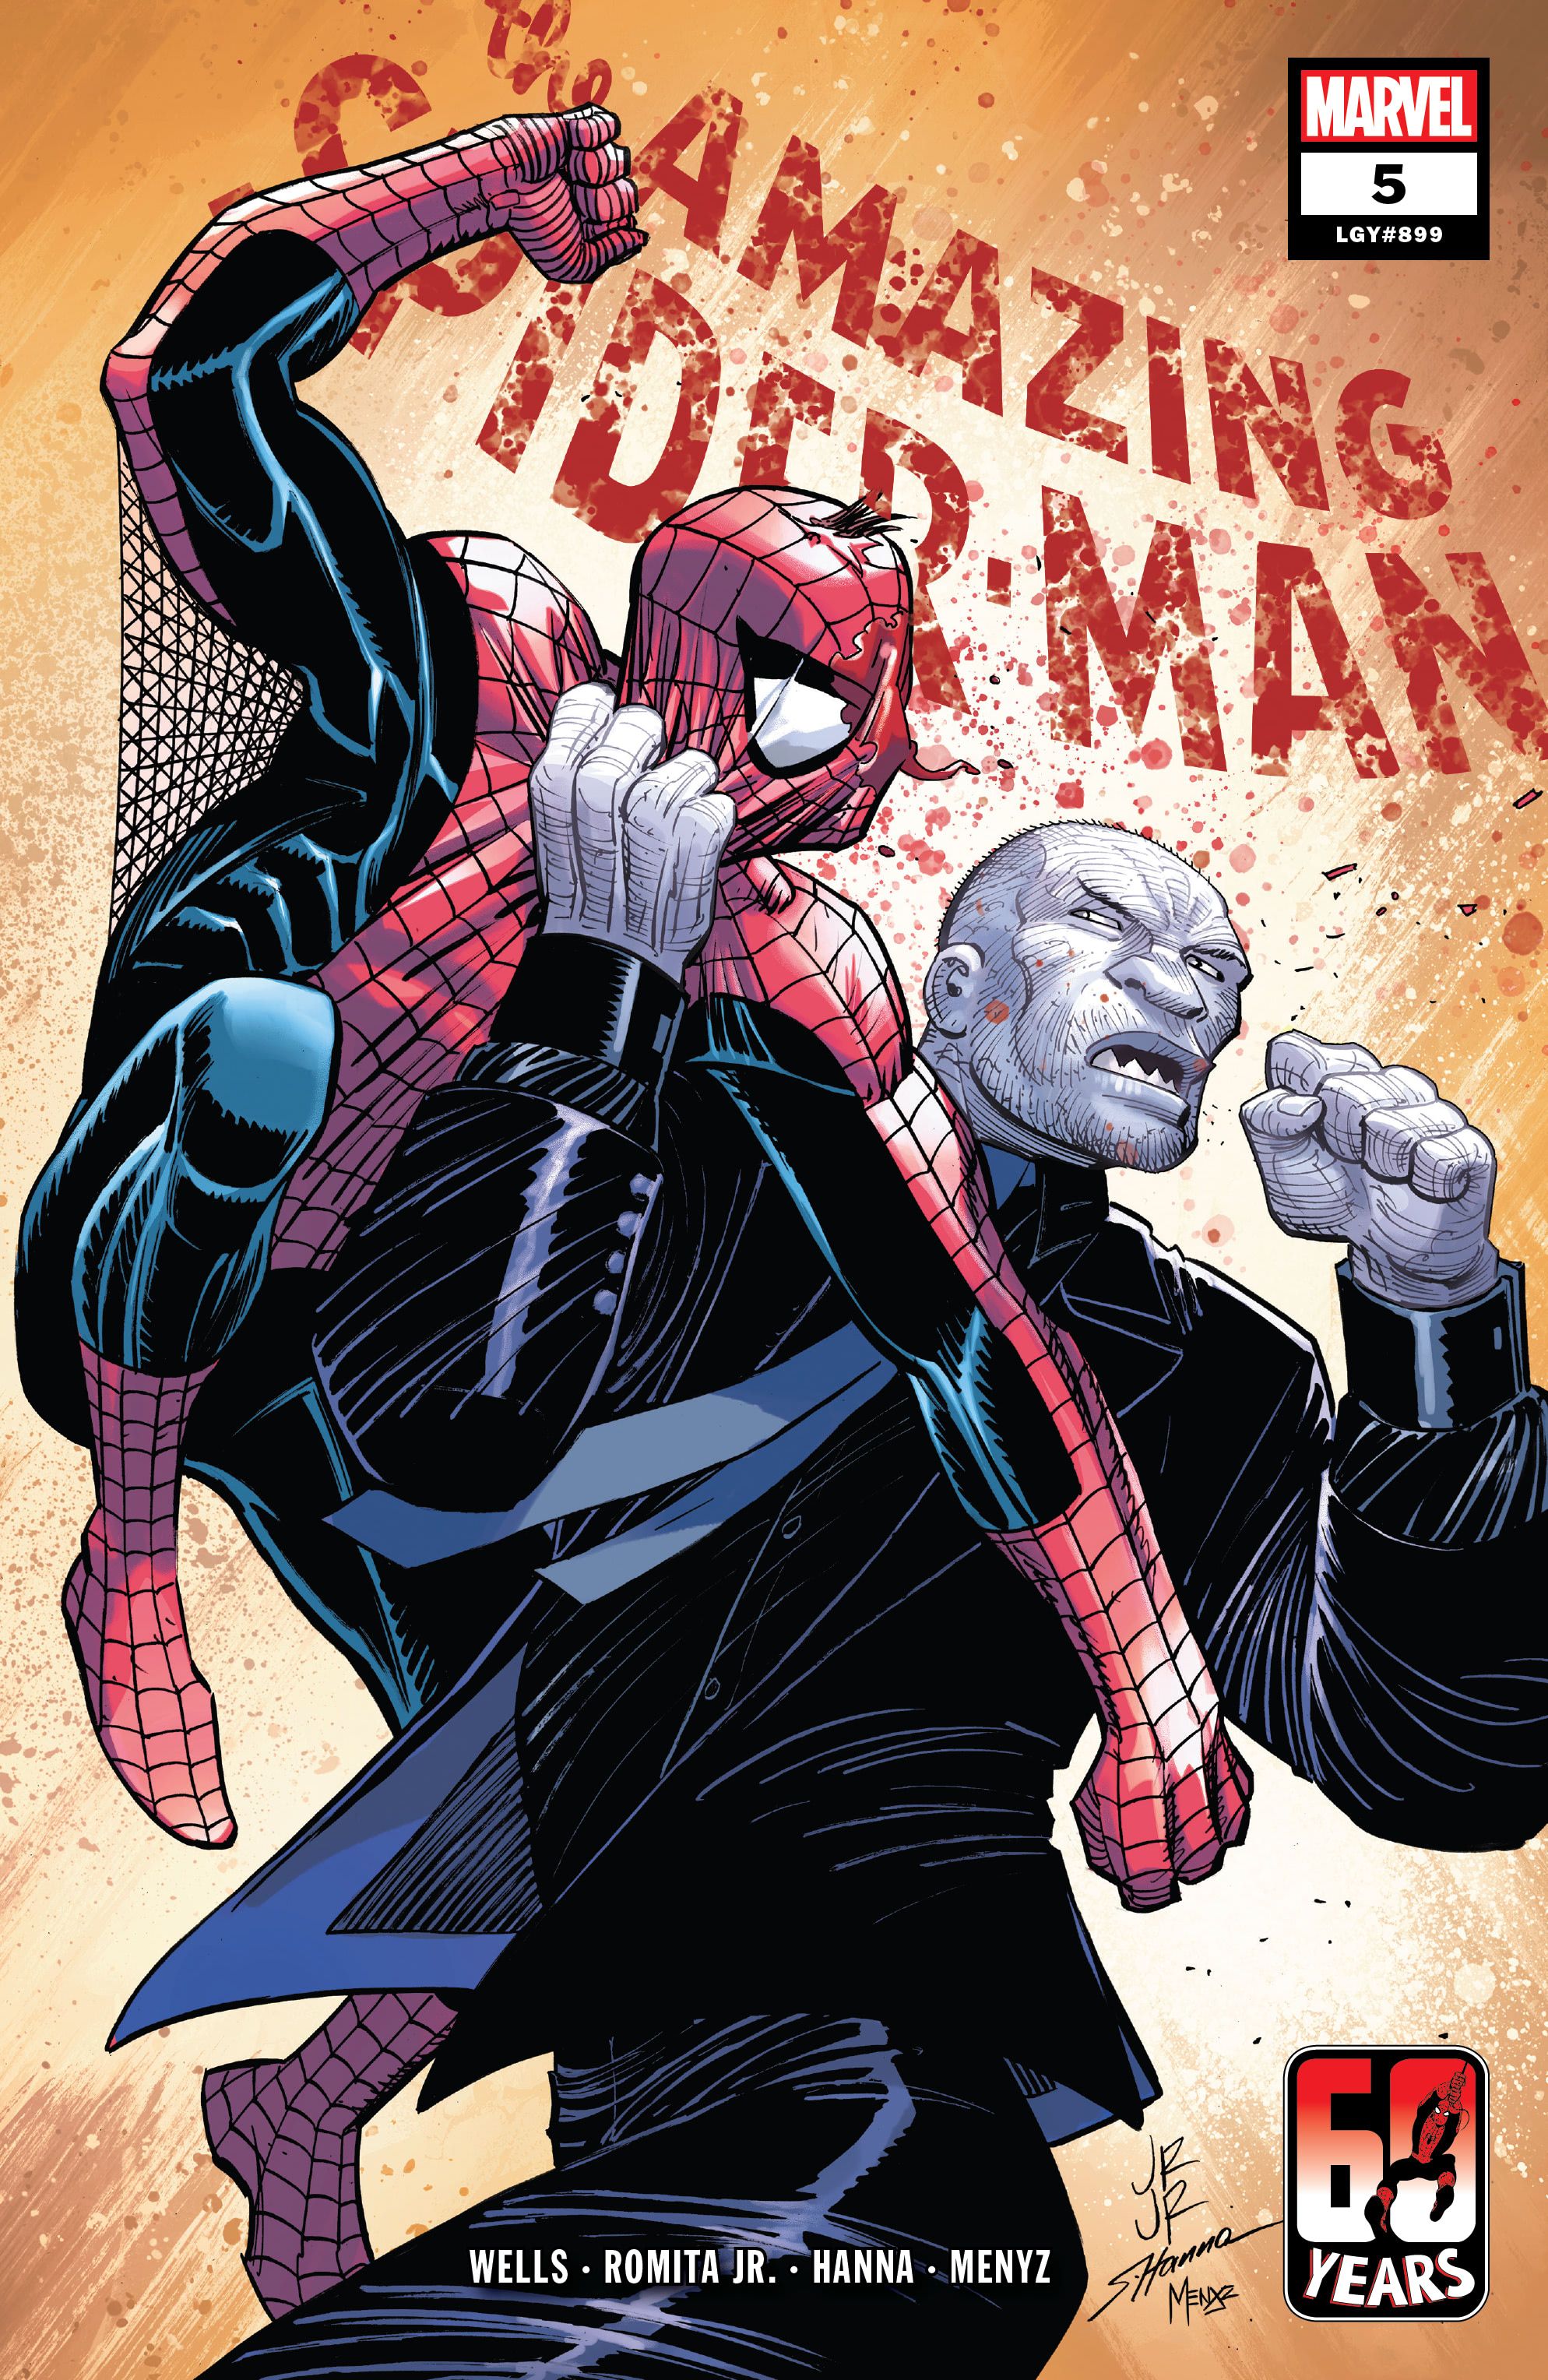 Cover of The Amazing Spider-Man #5 